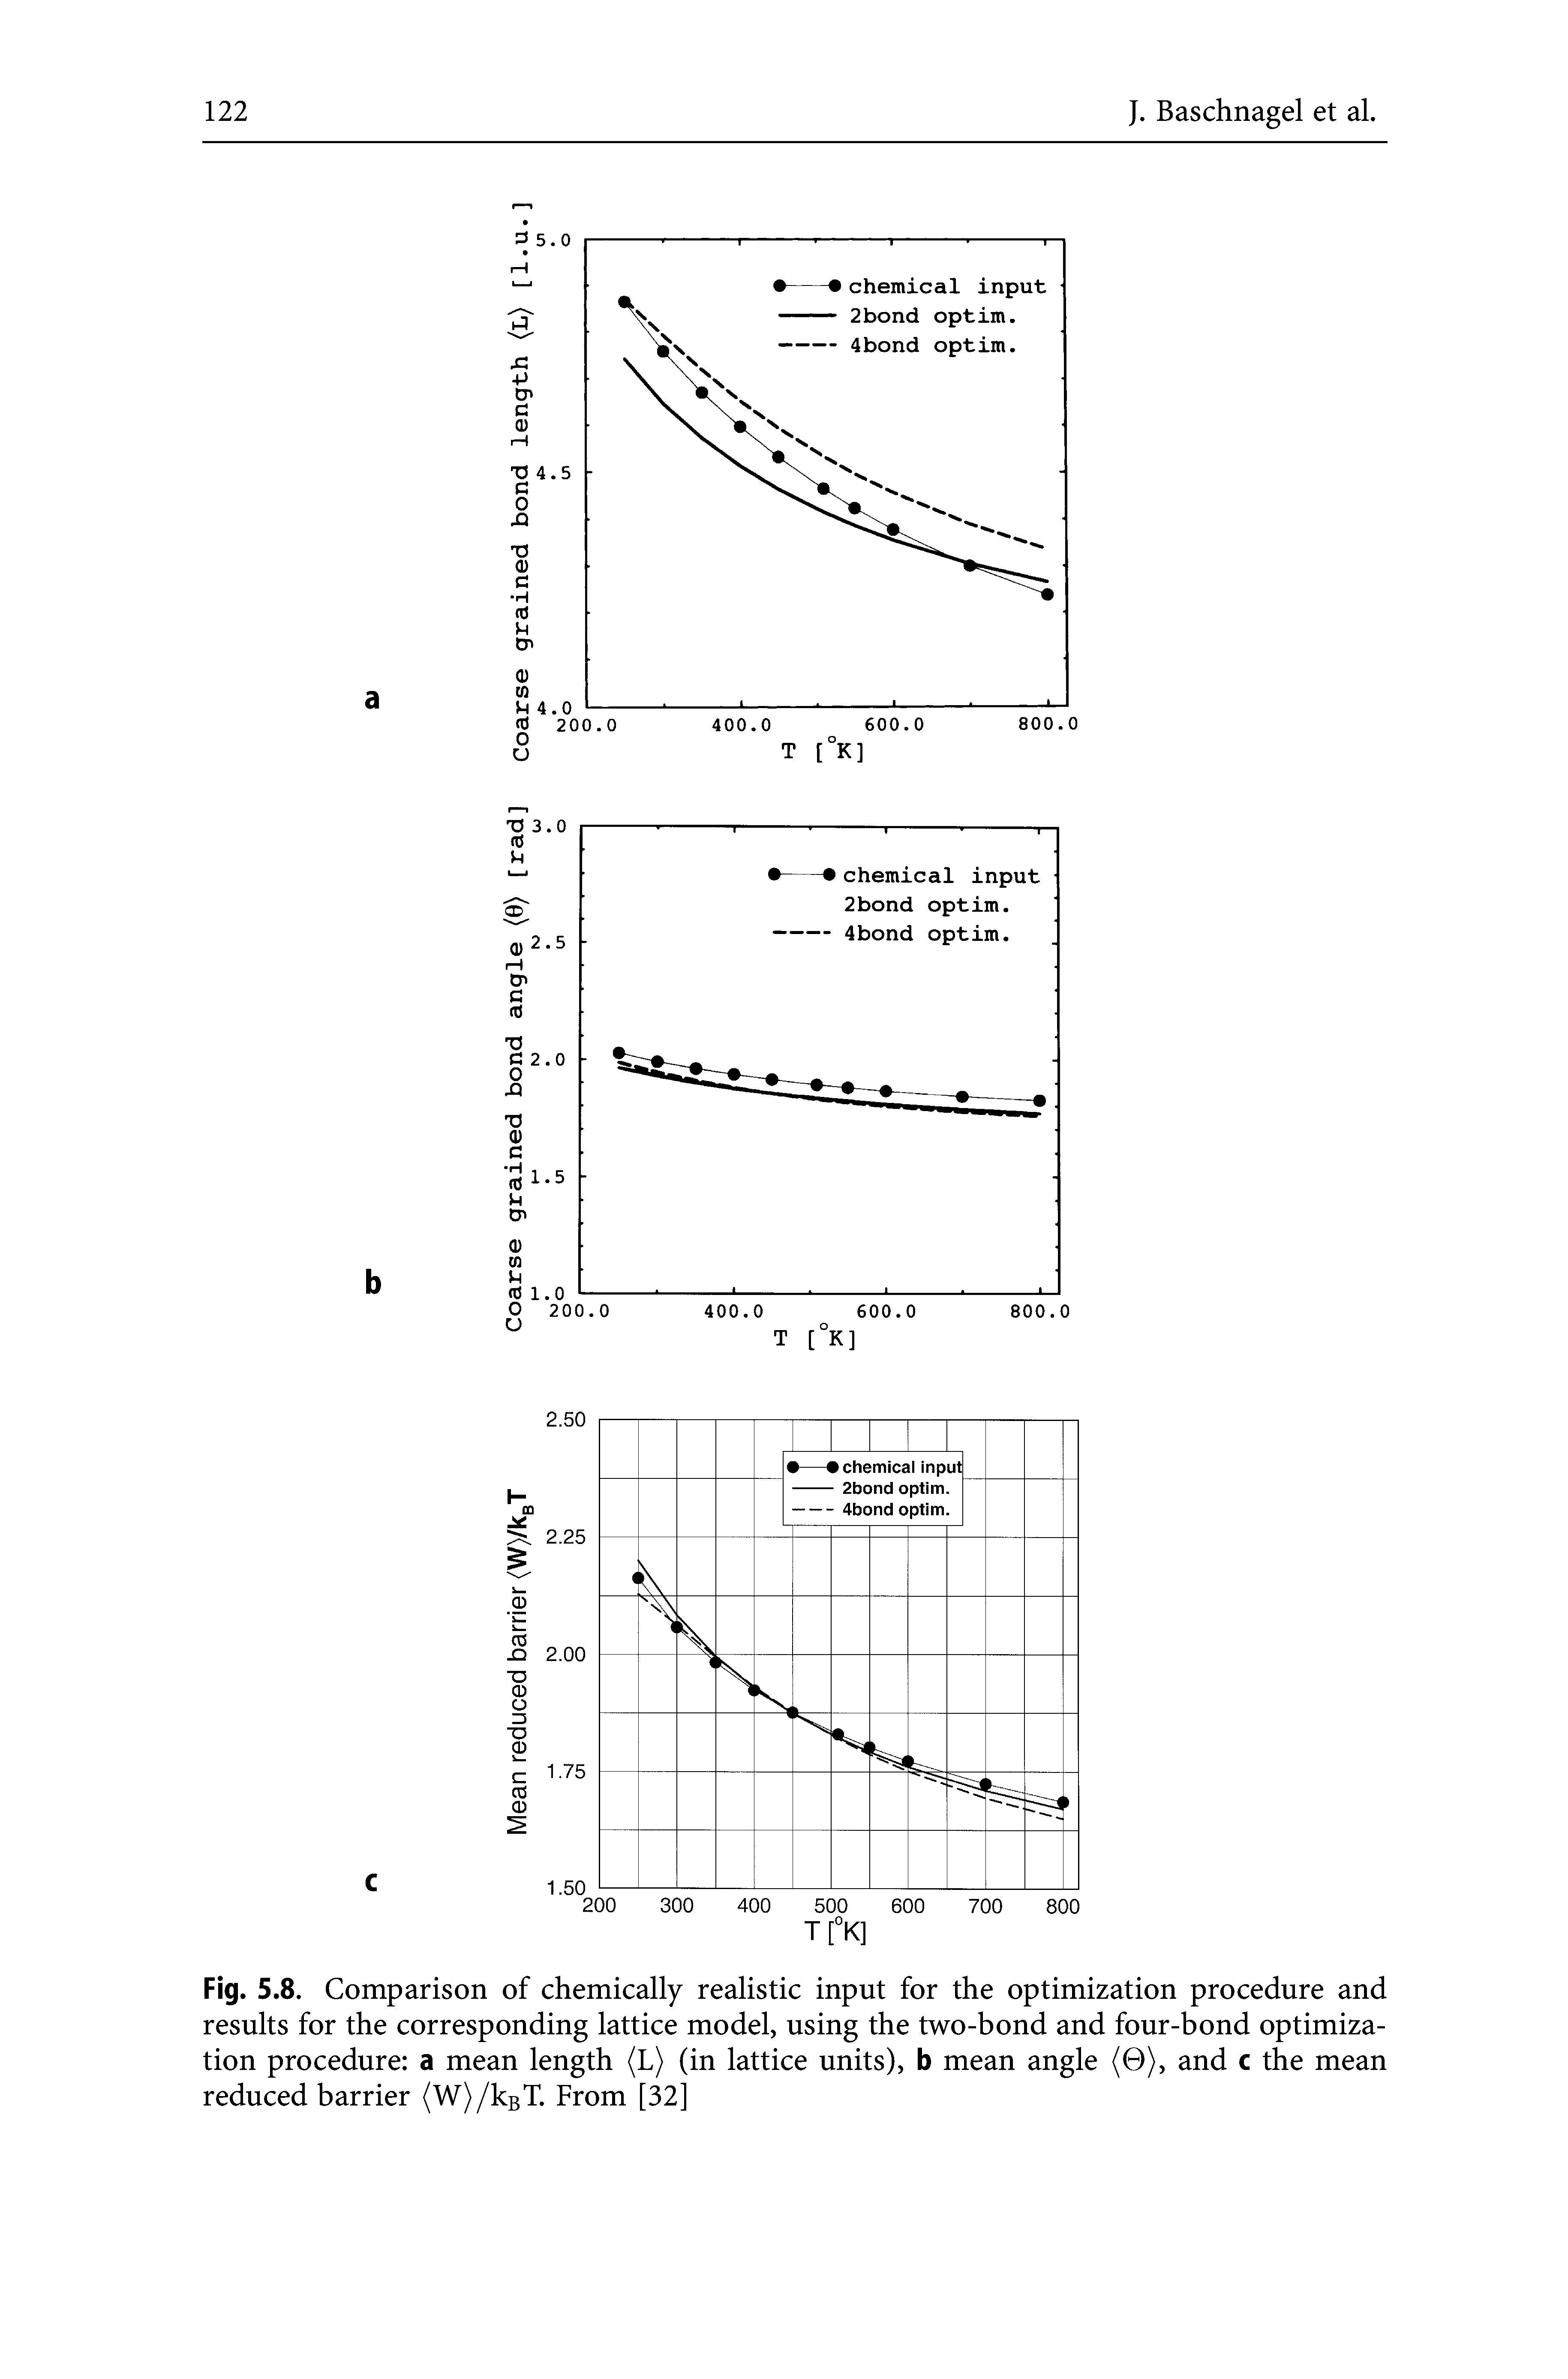 Fig. 5.8. Comparison of chemically realistic input for the optimization procedure and results for the corresponding lattice model, using the two-bond and four-bond optimization procedure a mean length (L) (in lattice units), b mean angle (0), and c the mean reduced barrier (W)/kBT. From [32]...